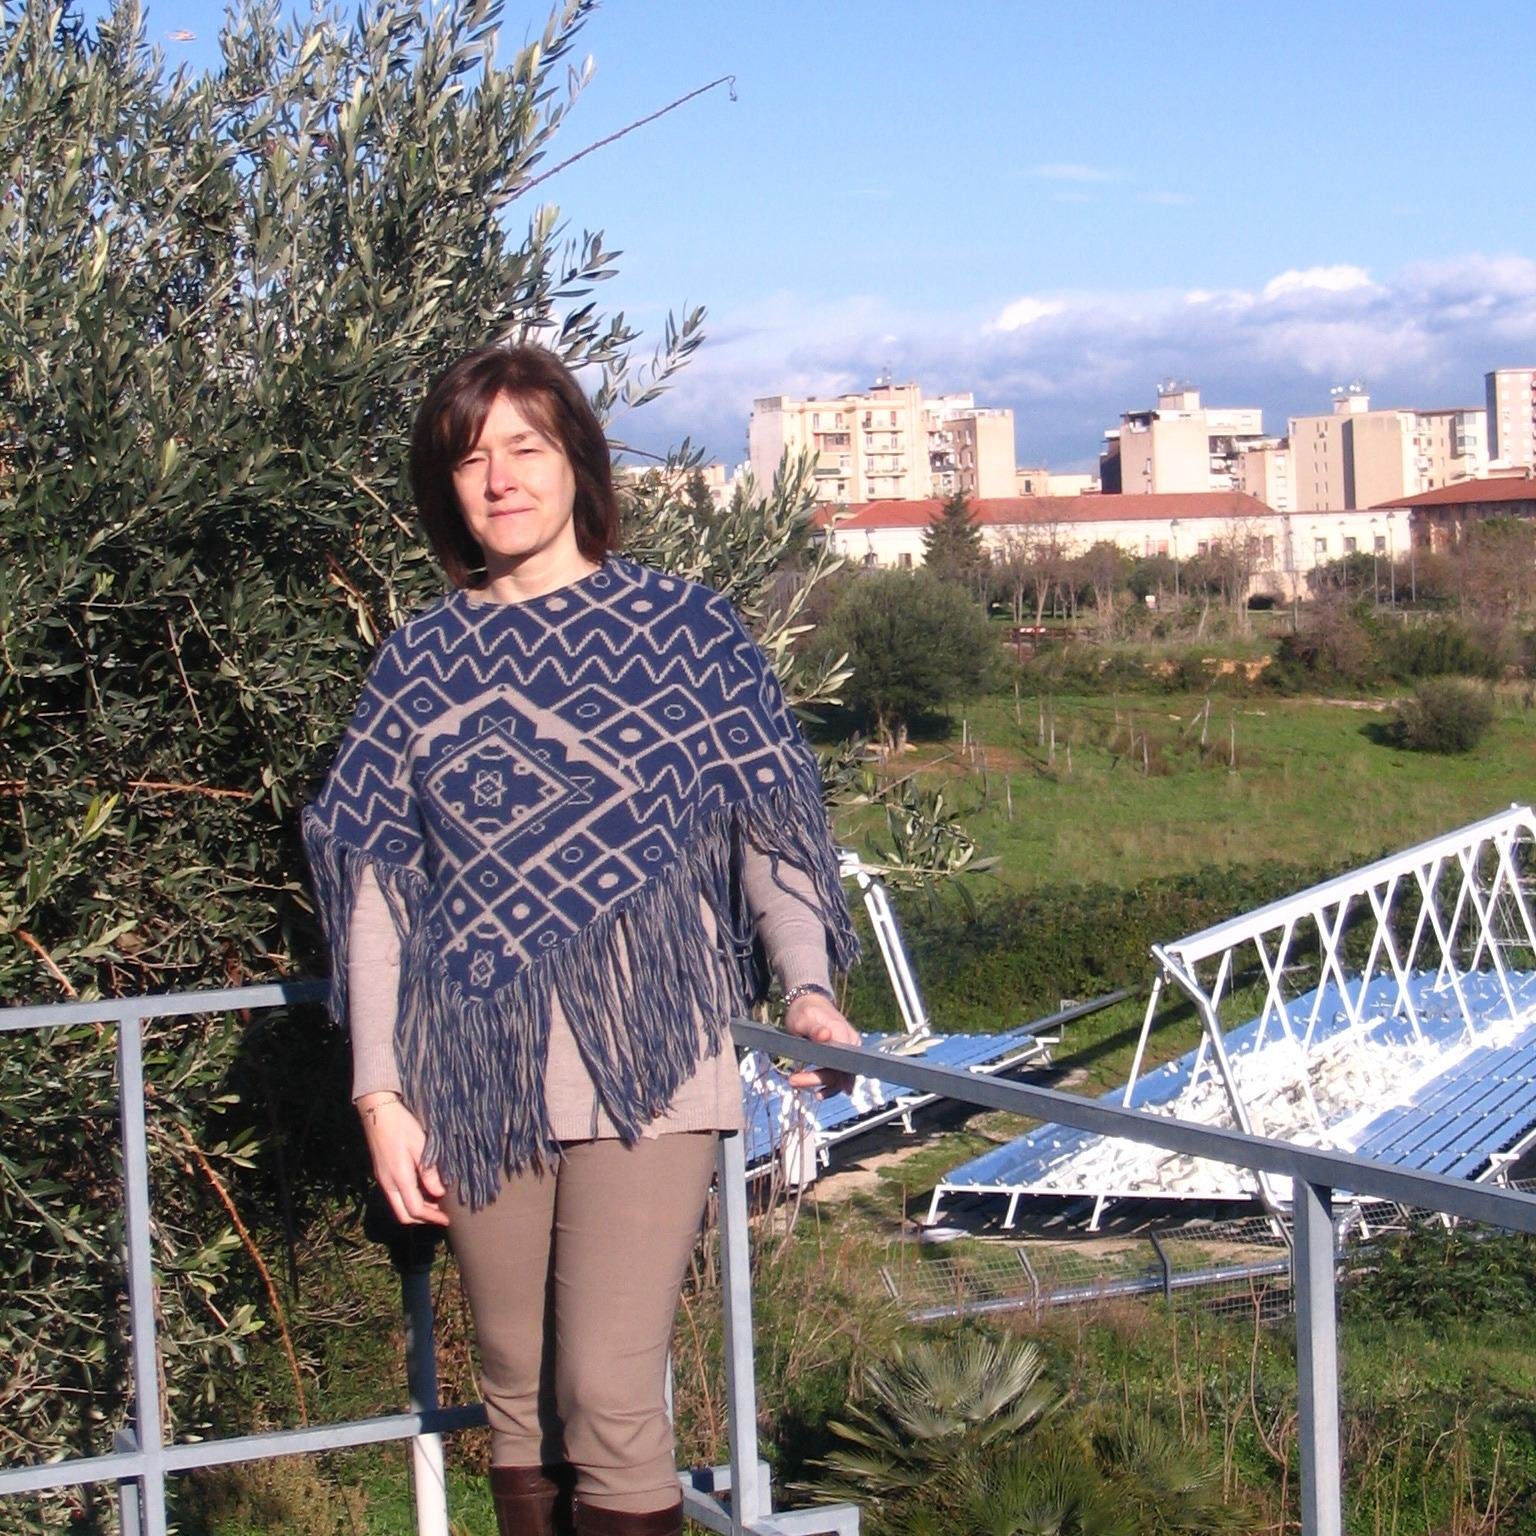 Full Professor of Organic Chemistry at the University of Palermo, loves gardening and books.